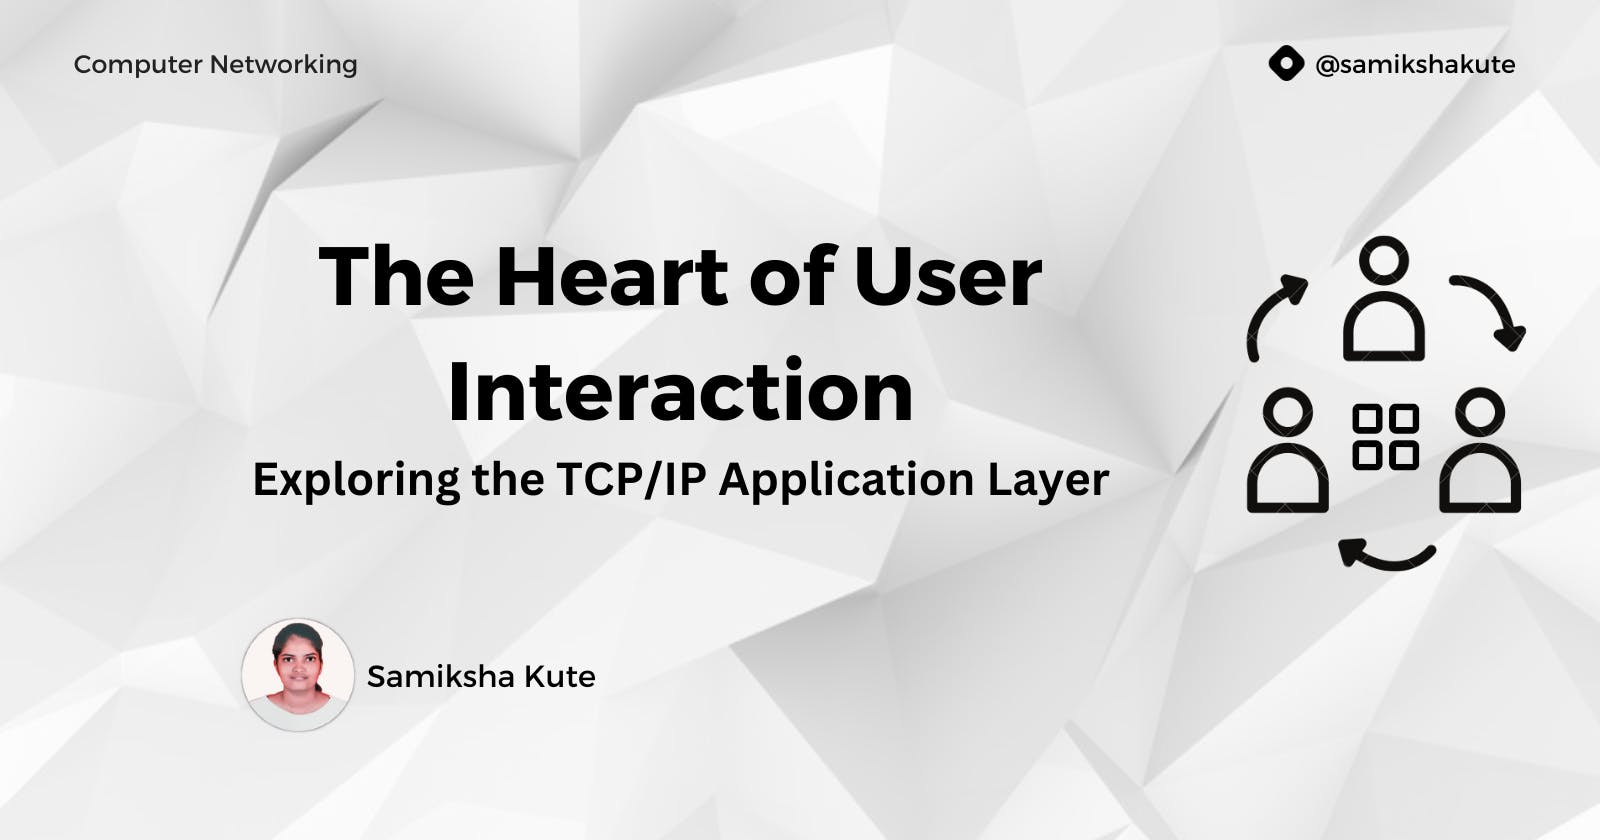 The Heart of User Interaction: Exploring the TCP/IP Application Layer